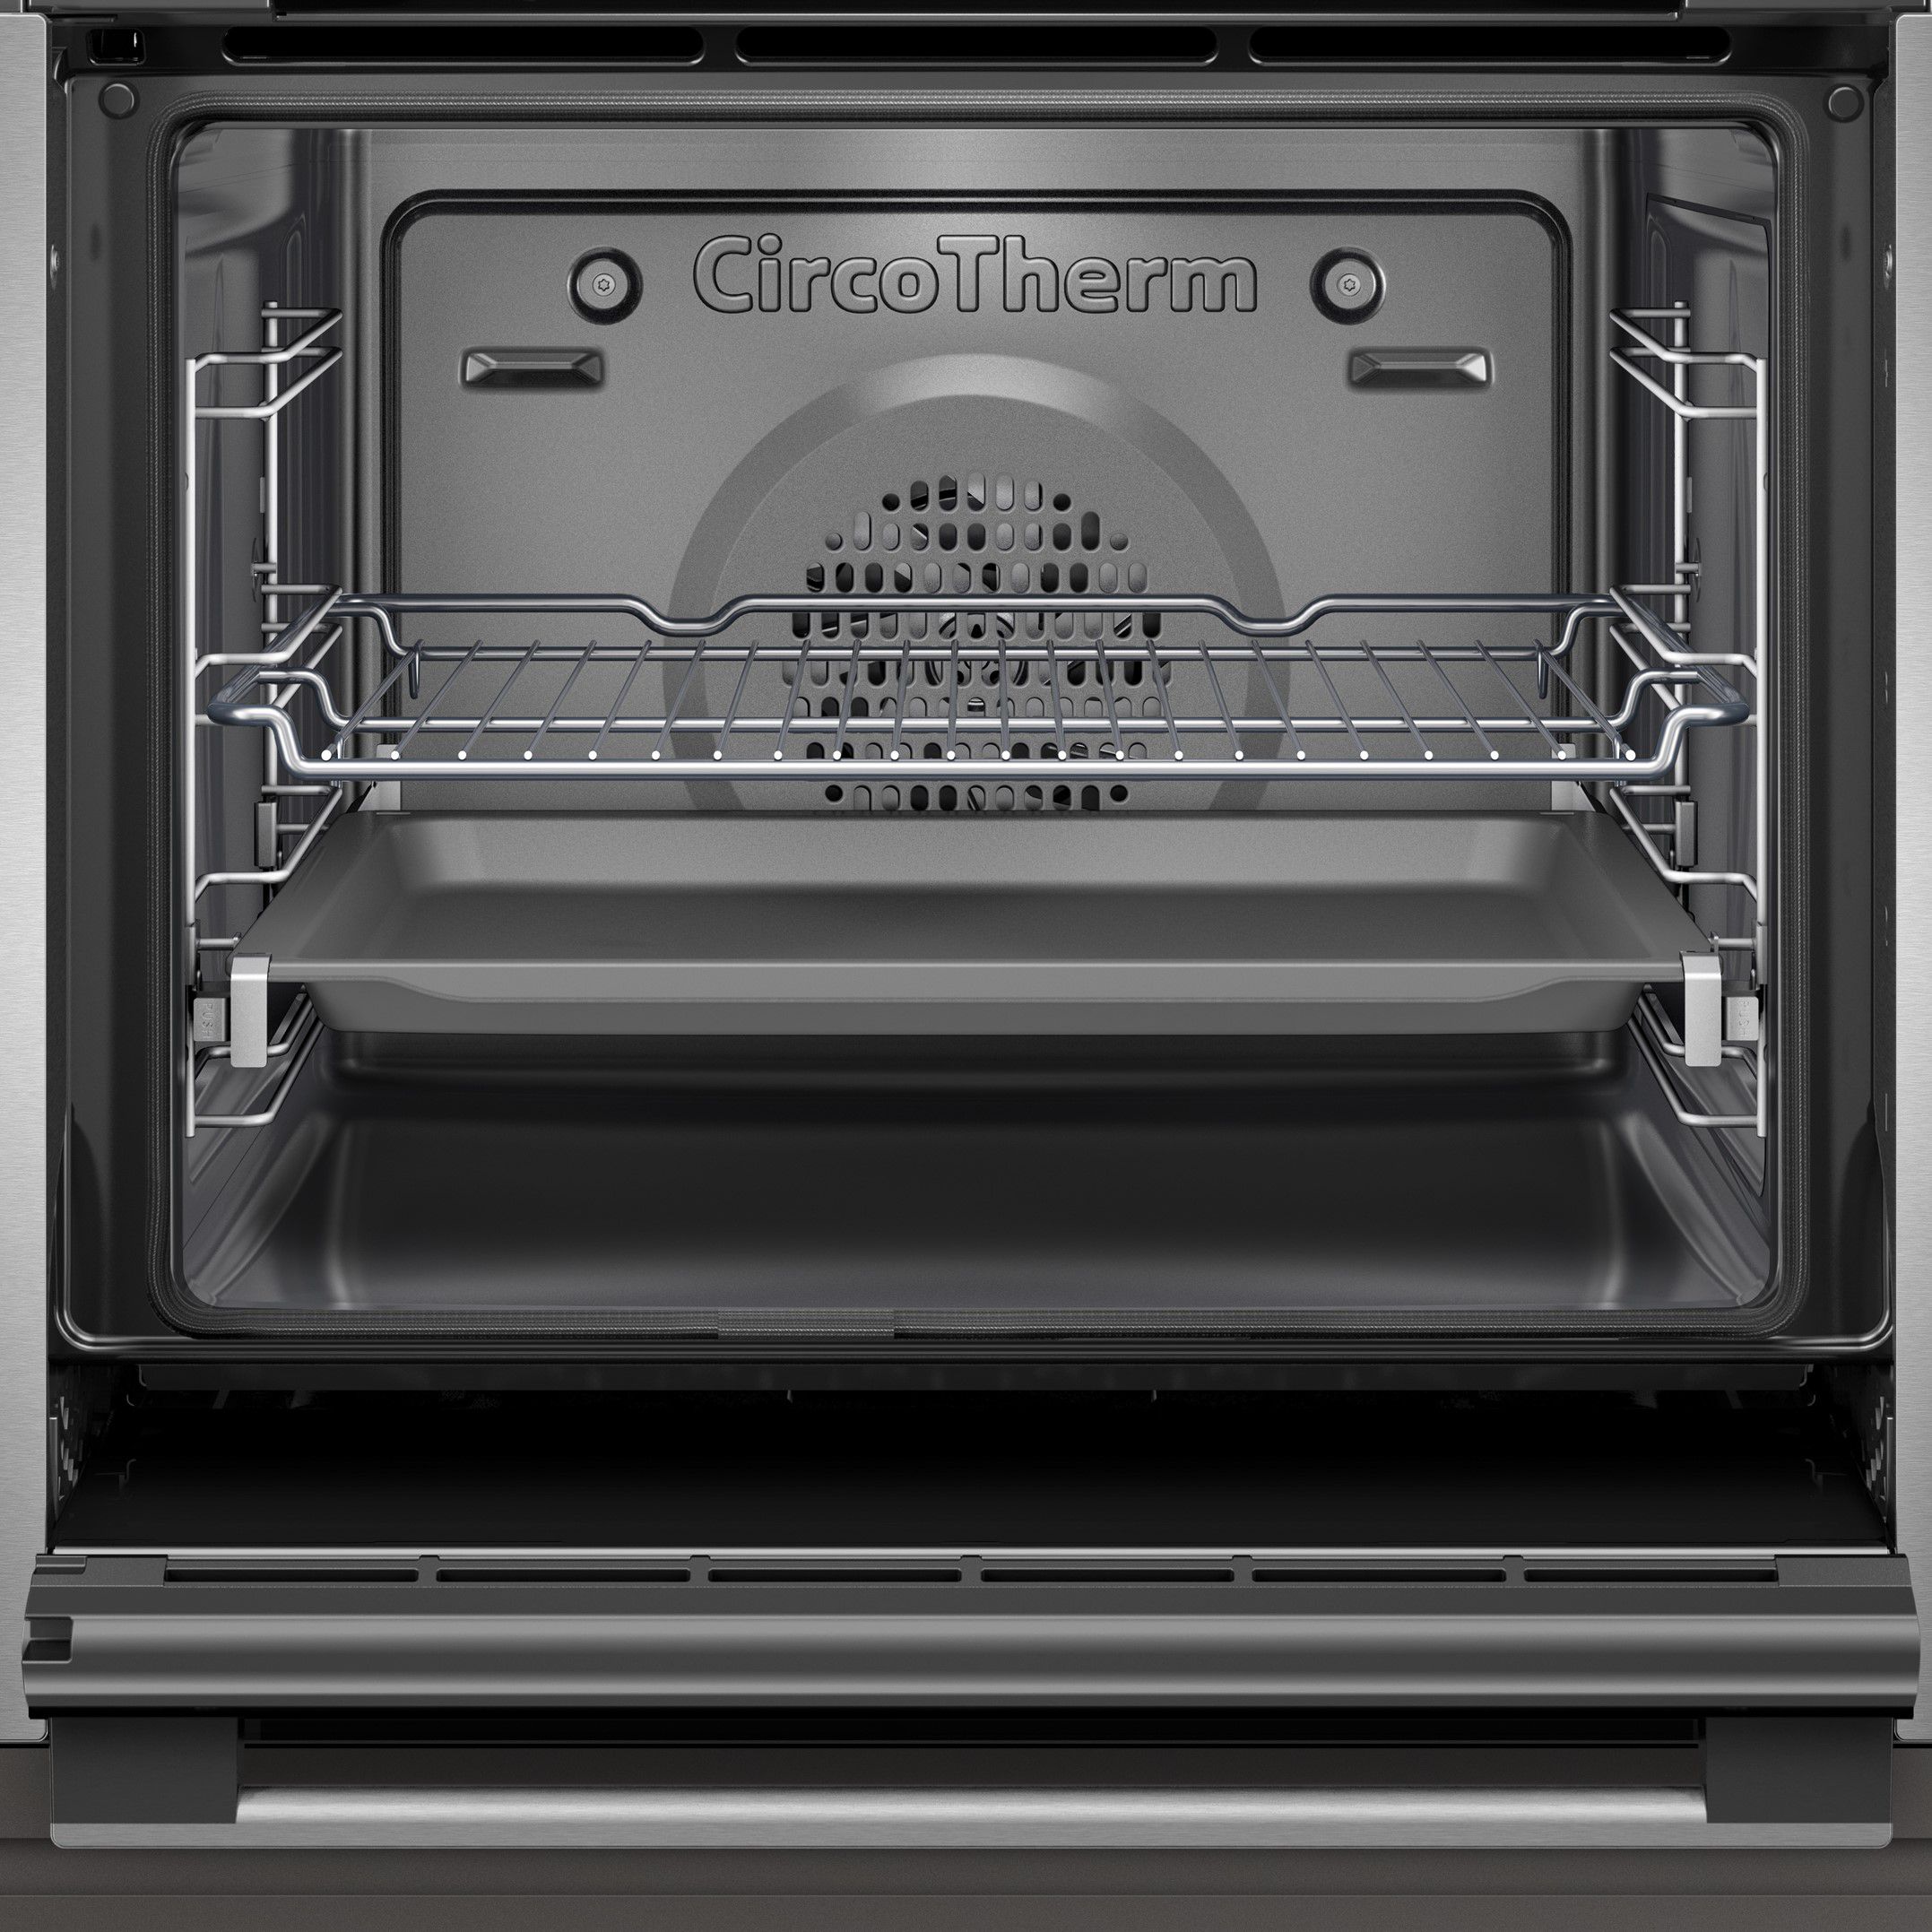 NEFF B6ACH7HH0B Built-in Single electric multifunction Oven - Black stainless steel effect